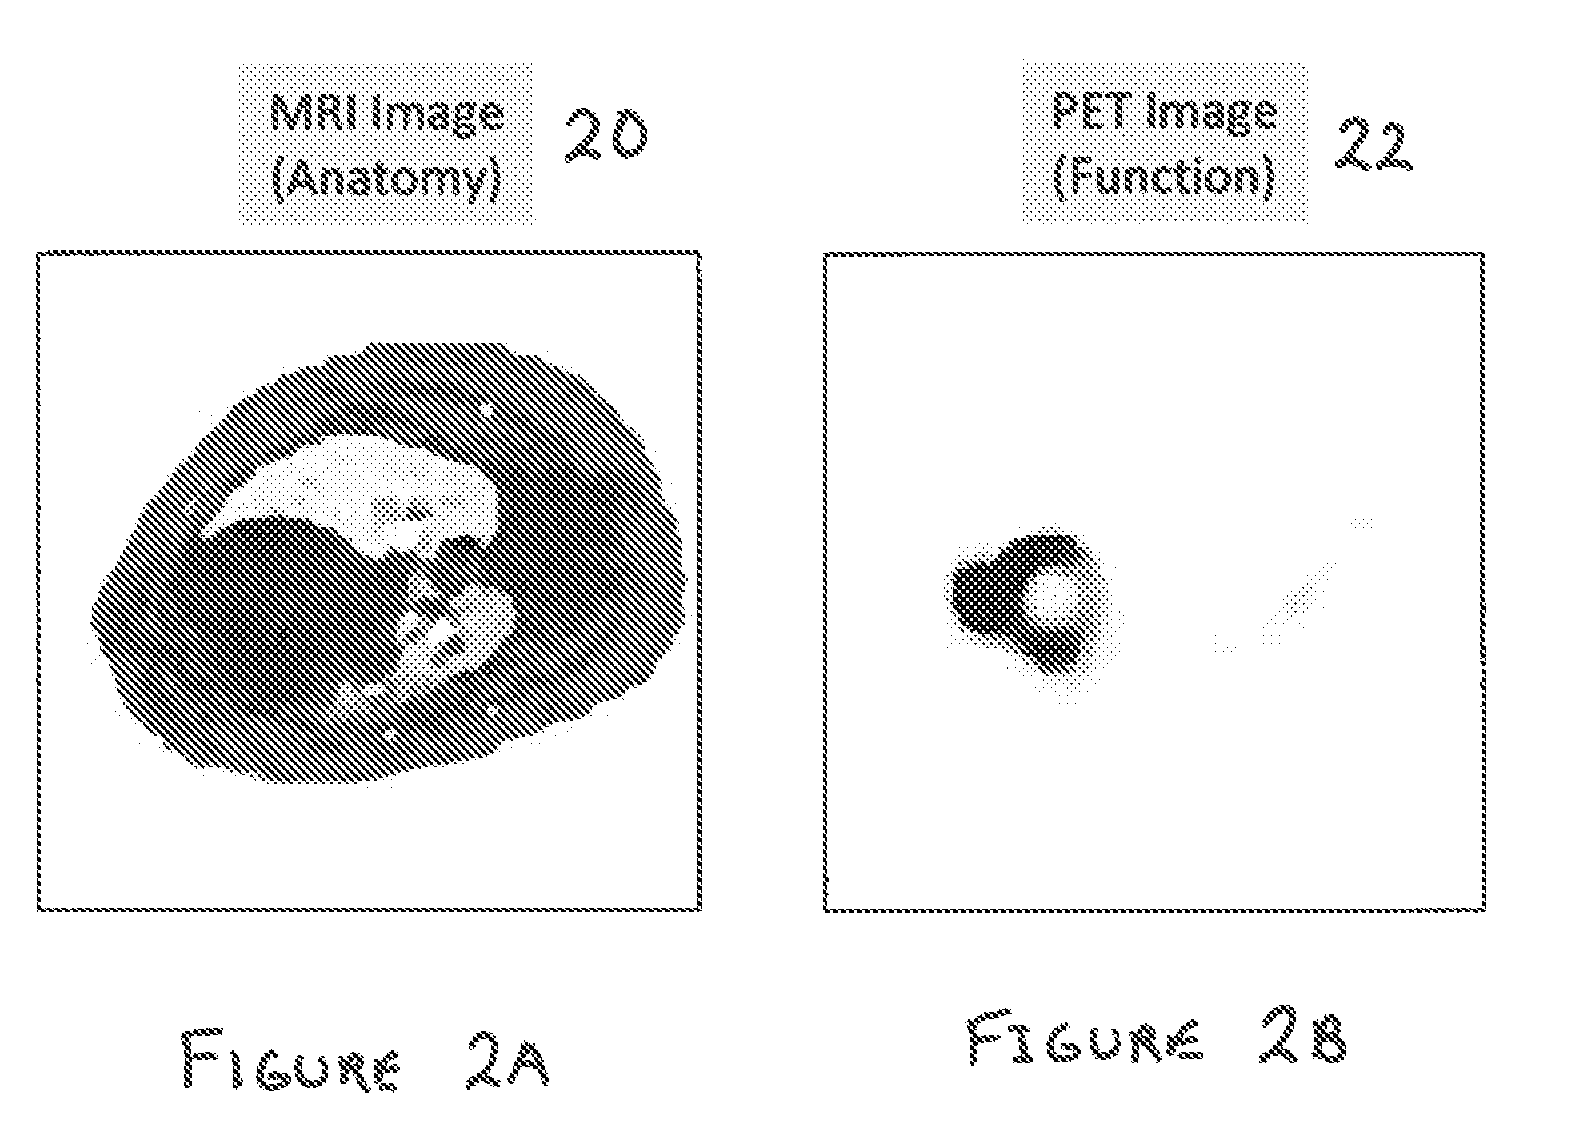 System and method for correcting attenuation in hybrid medical imaging